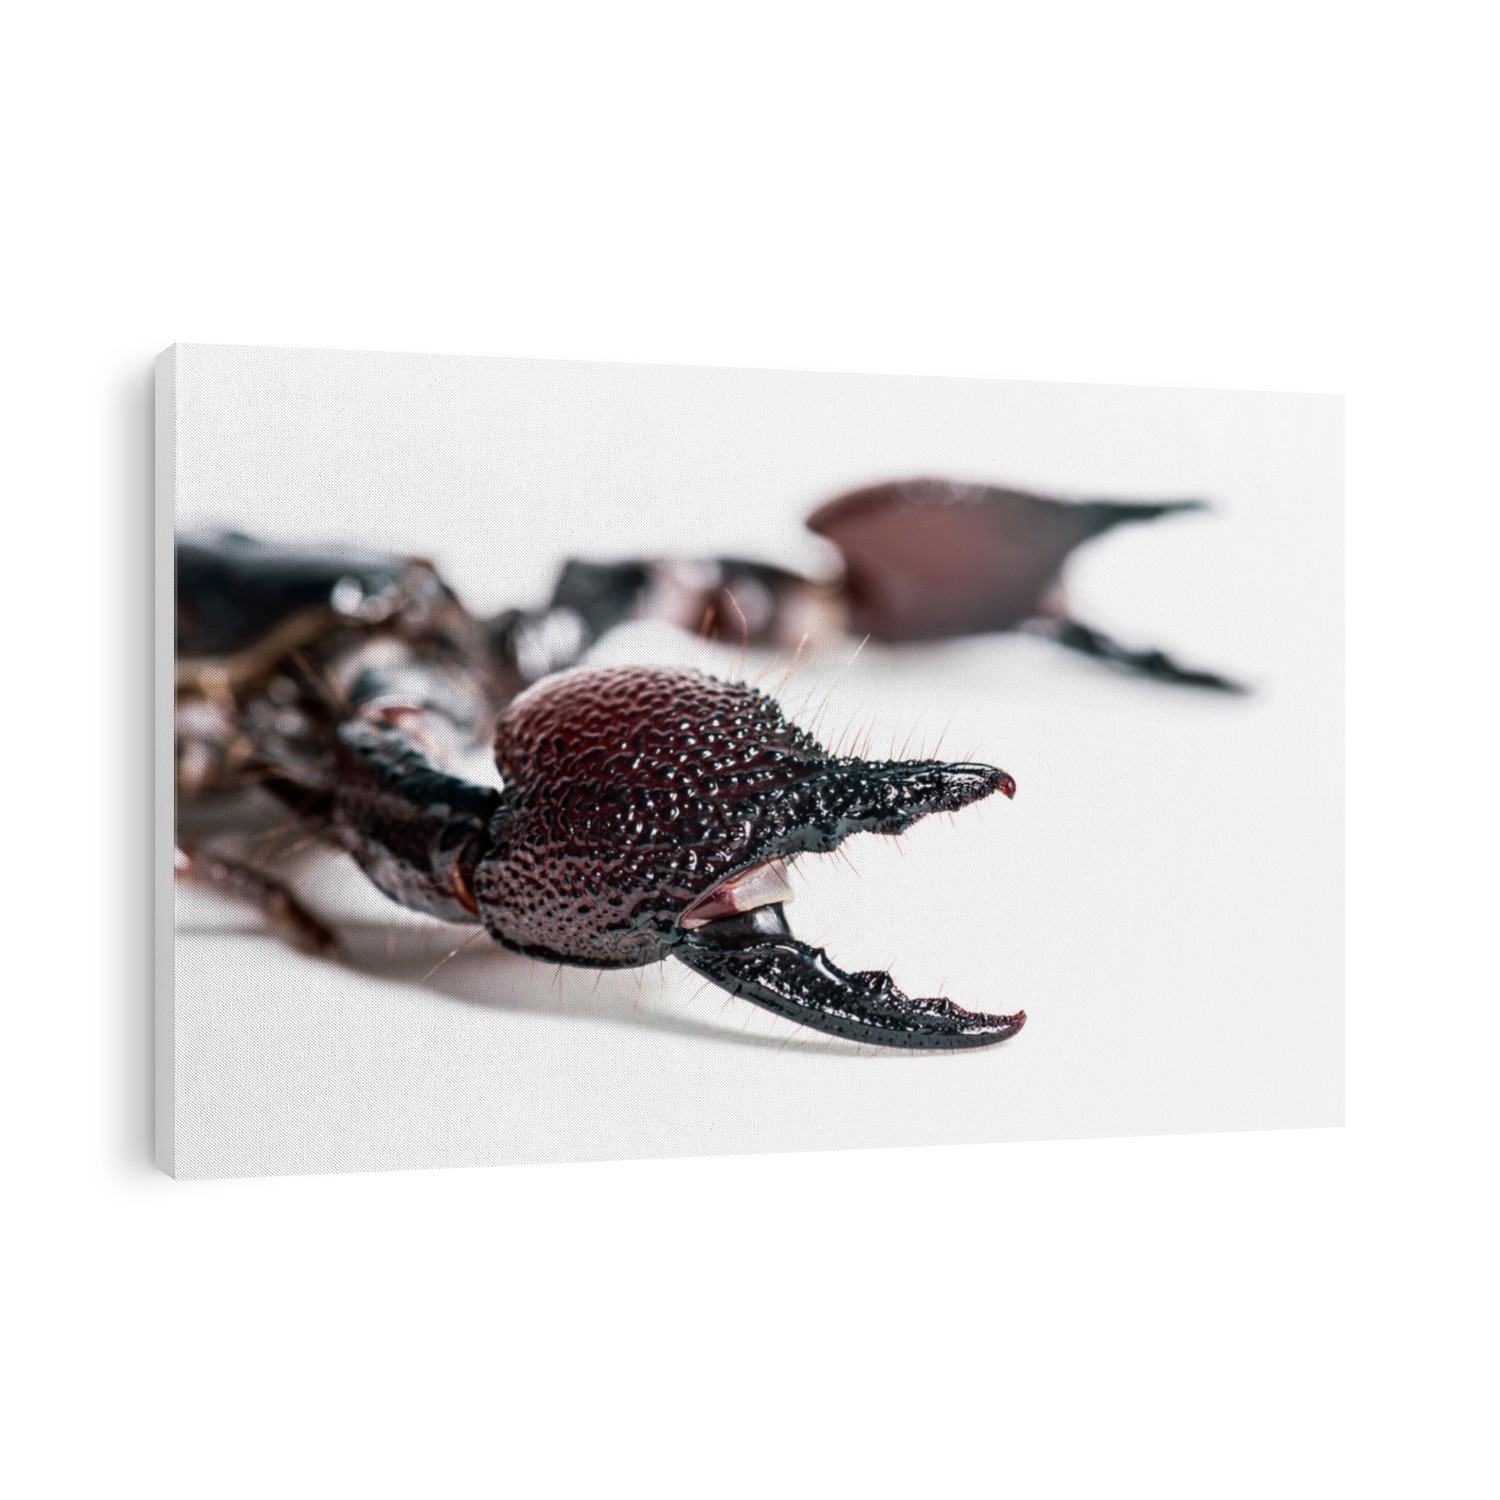 Emperor scorpion, Pandinus imperator, pincers in close up, in front of white background